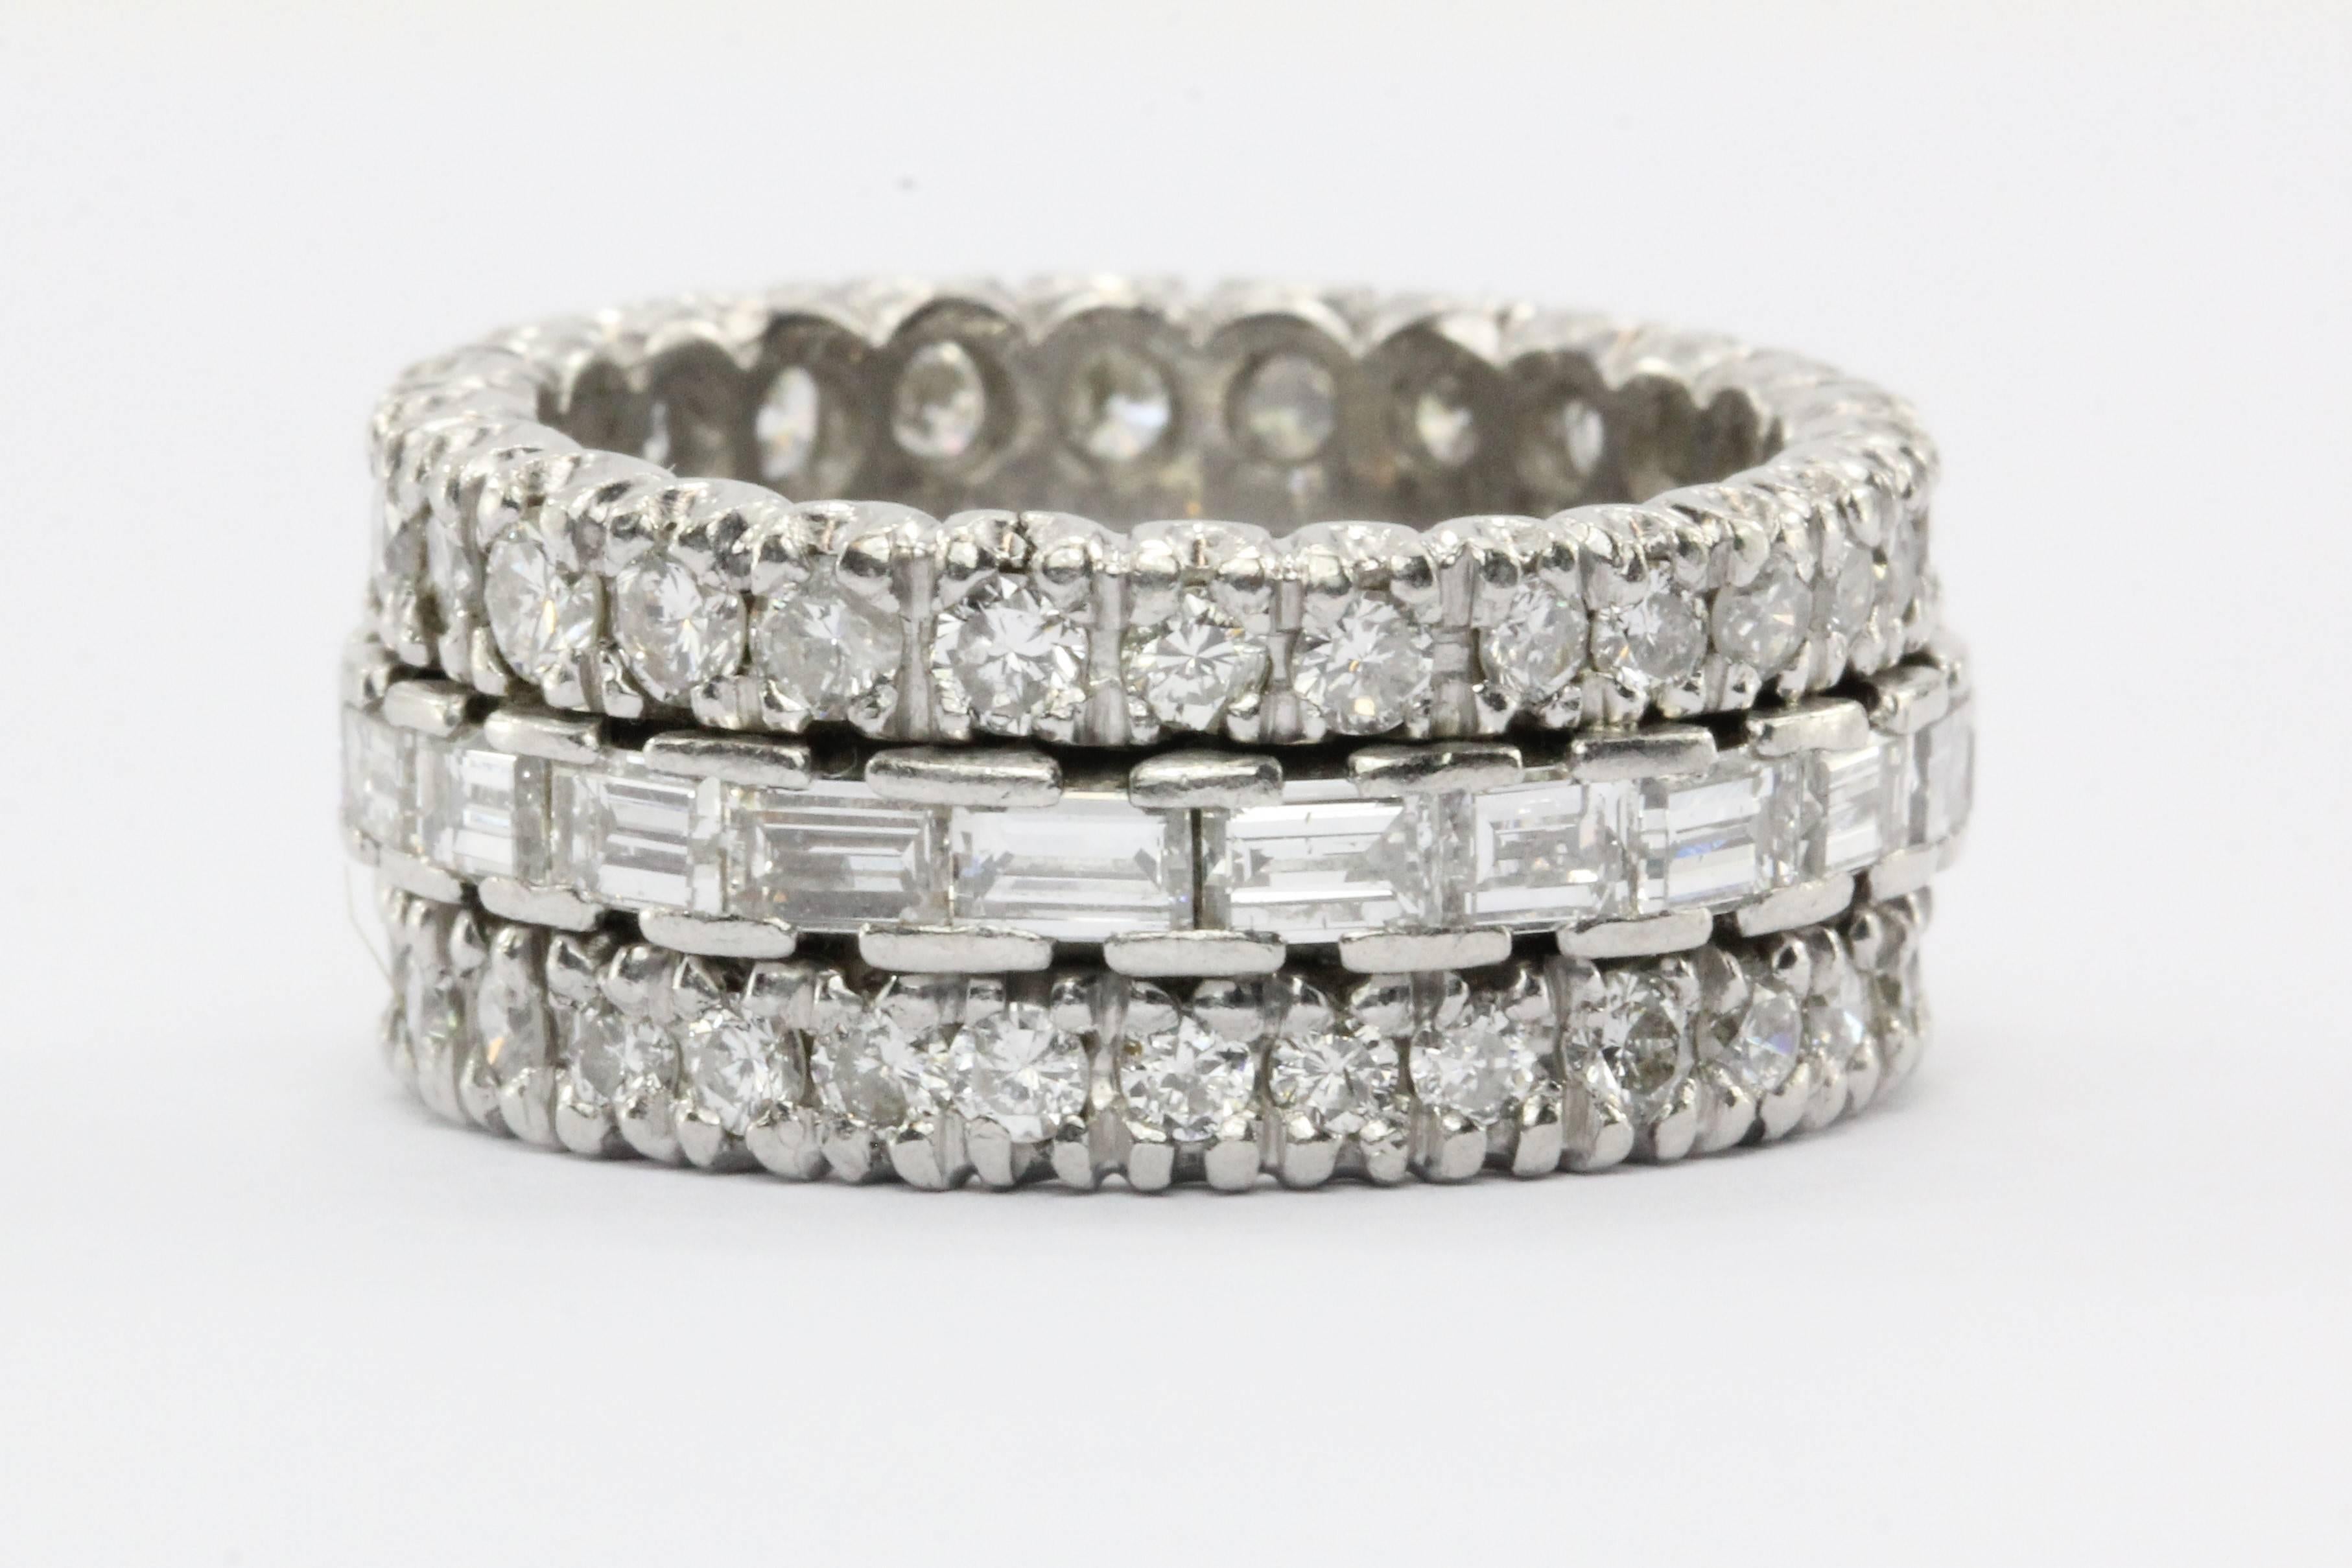 Platinum 4 CTW Diamond Eternity Band Ring. The ring is in excellent estate condition and ready to wear. It is set with approximately 4 carats of diamonds. The center of the band has approximately 2 carats of E/F color Vvs1- Vs2 clarity Baguette